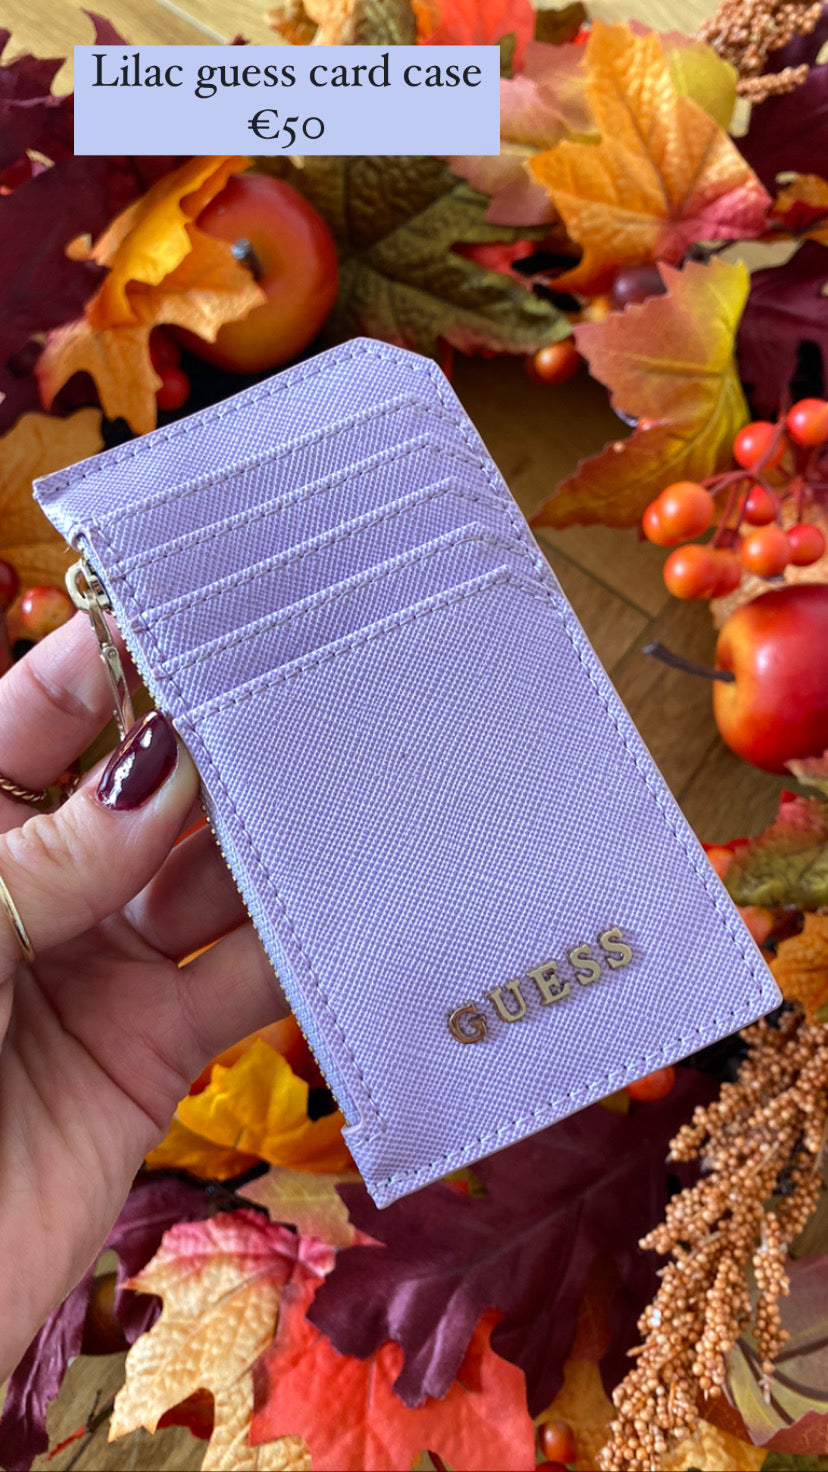 Lilac guess card case